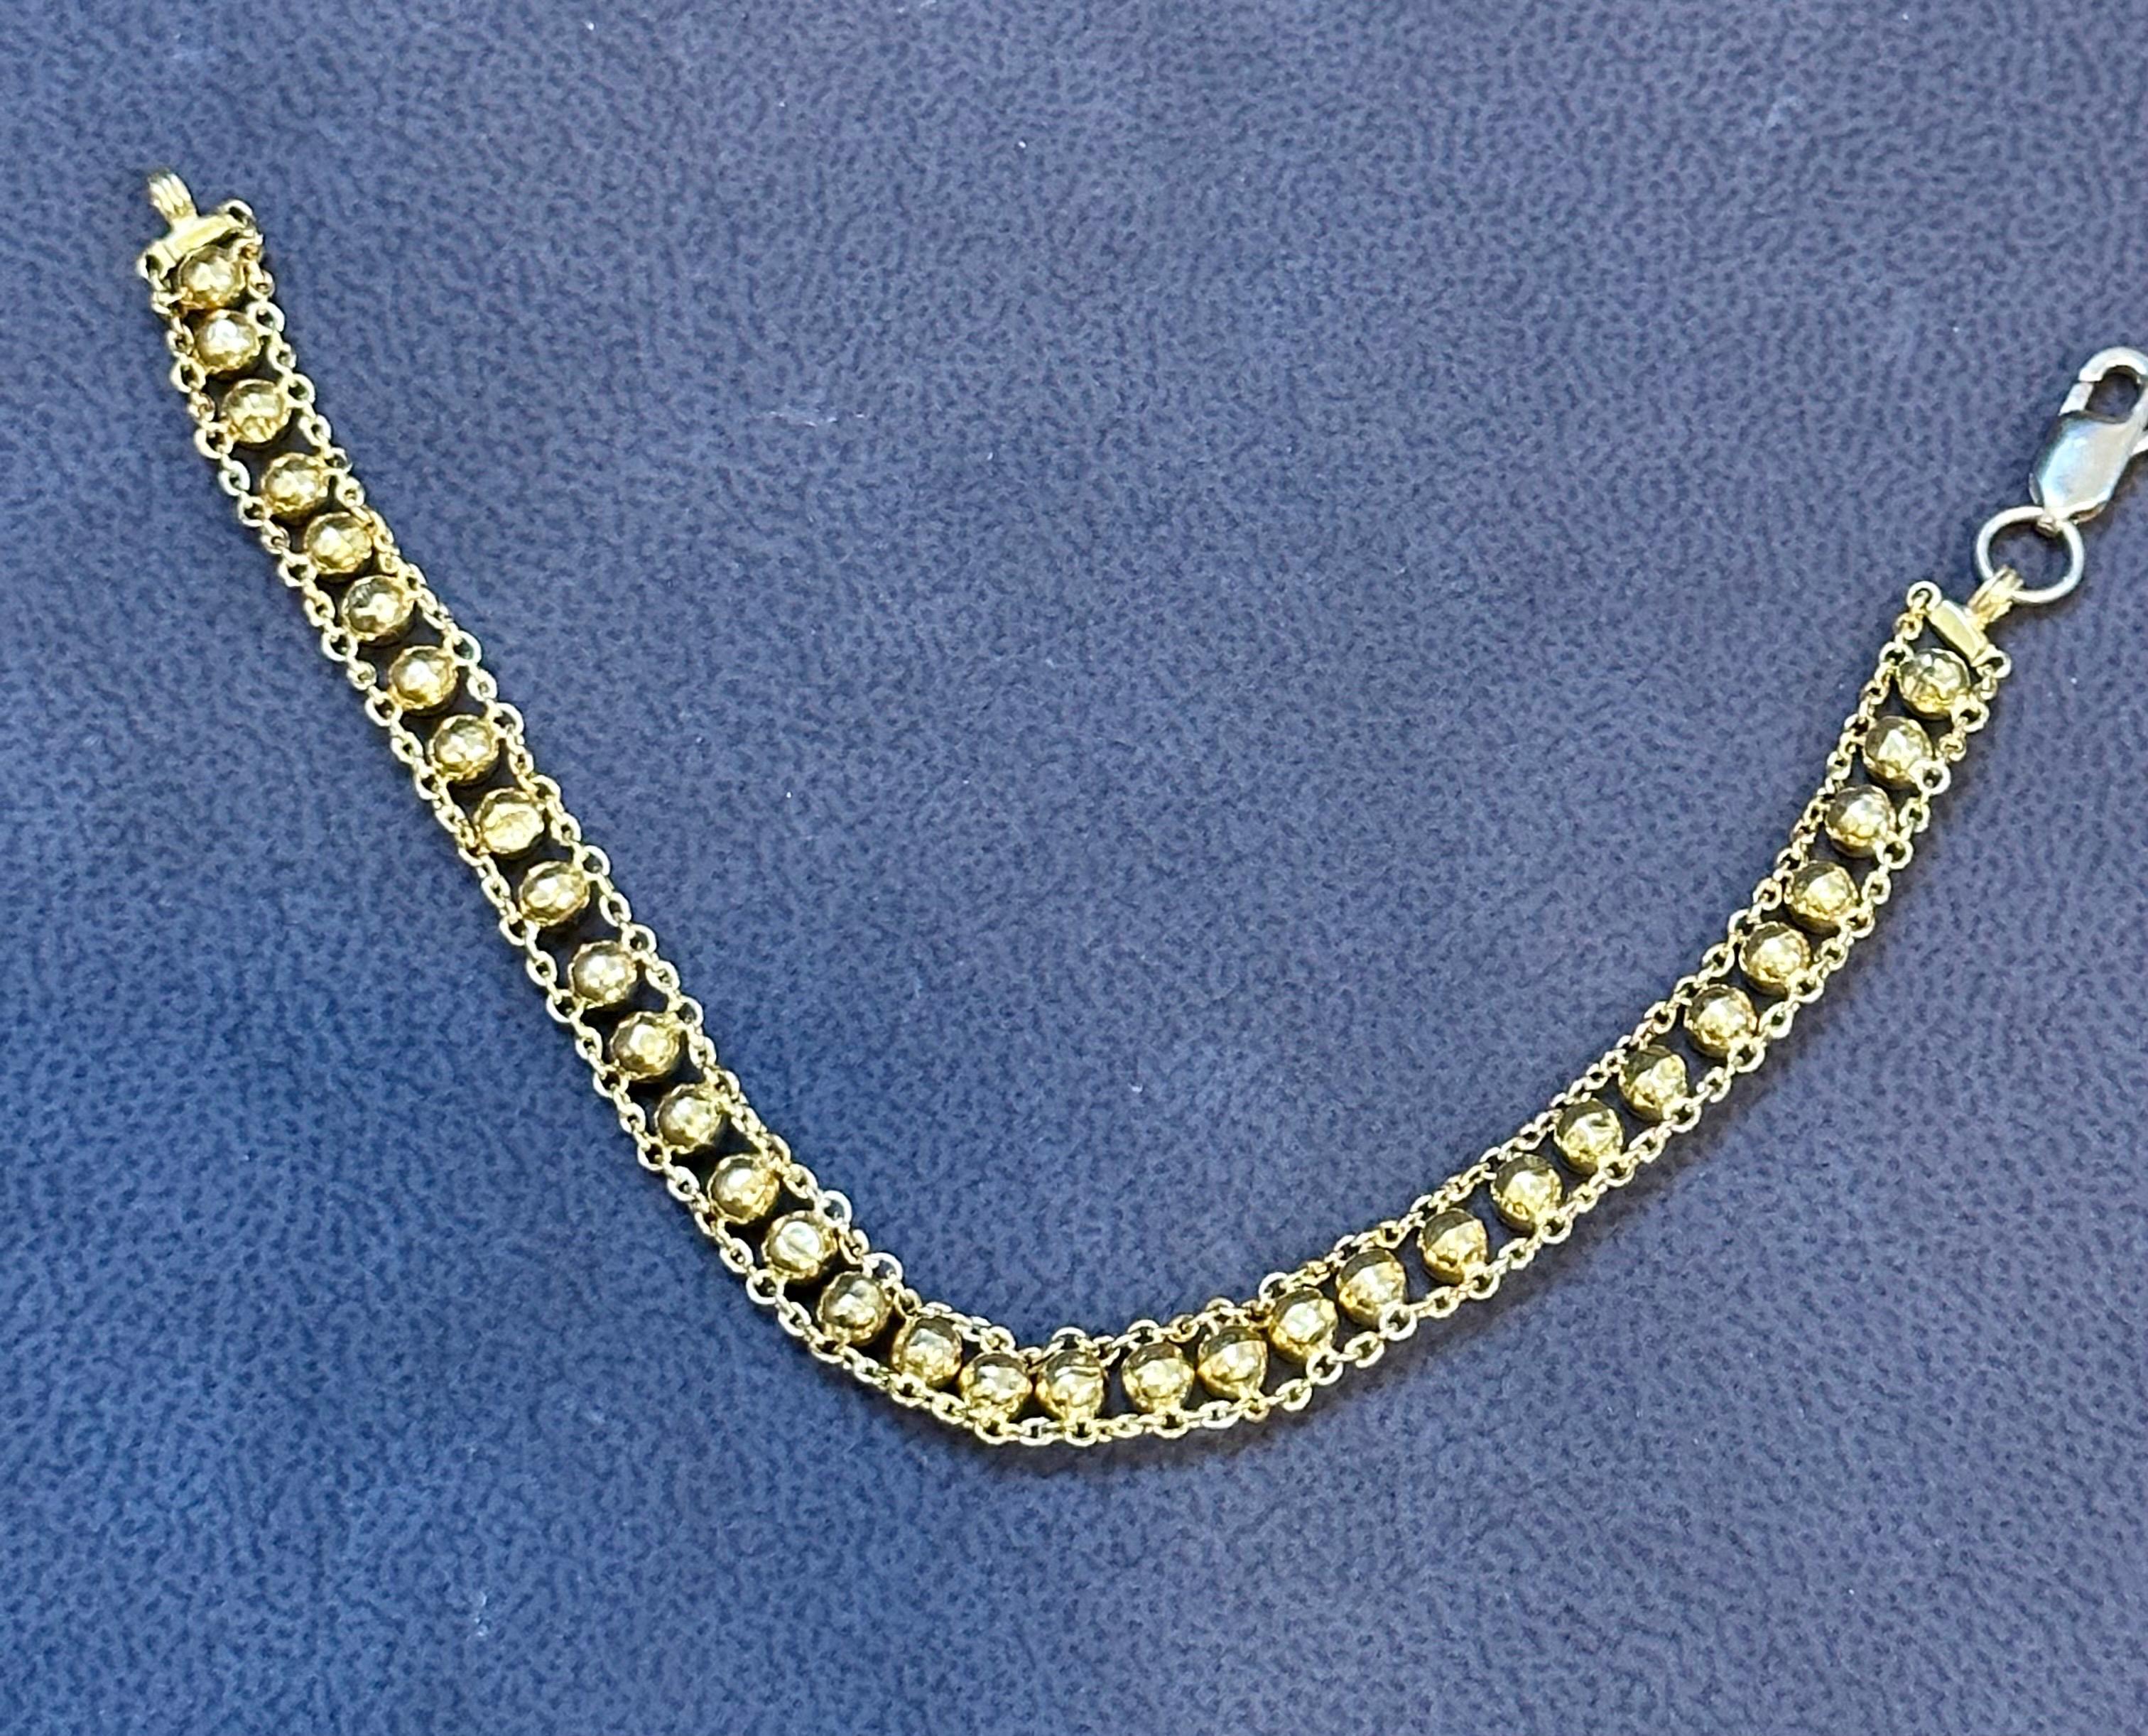 22 Karat Yellow Gold 7.7 Gm Link Bracelet Unisex In Excellent Condition For Sale In New York, NY